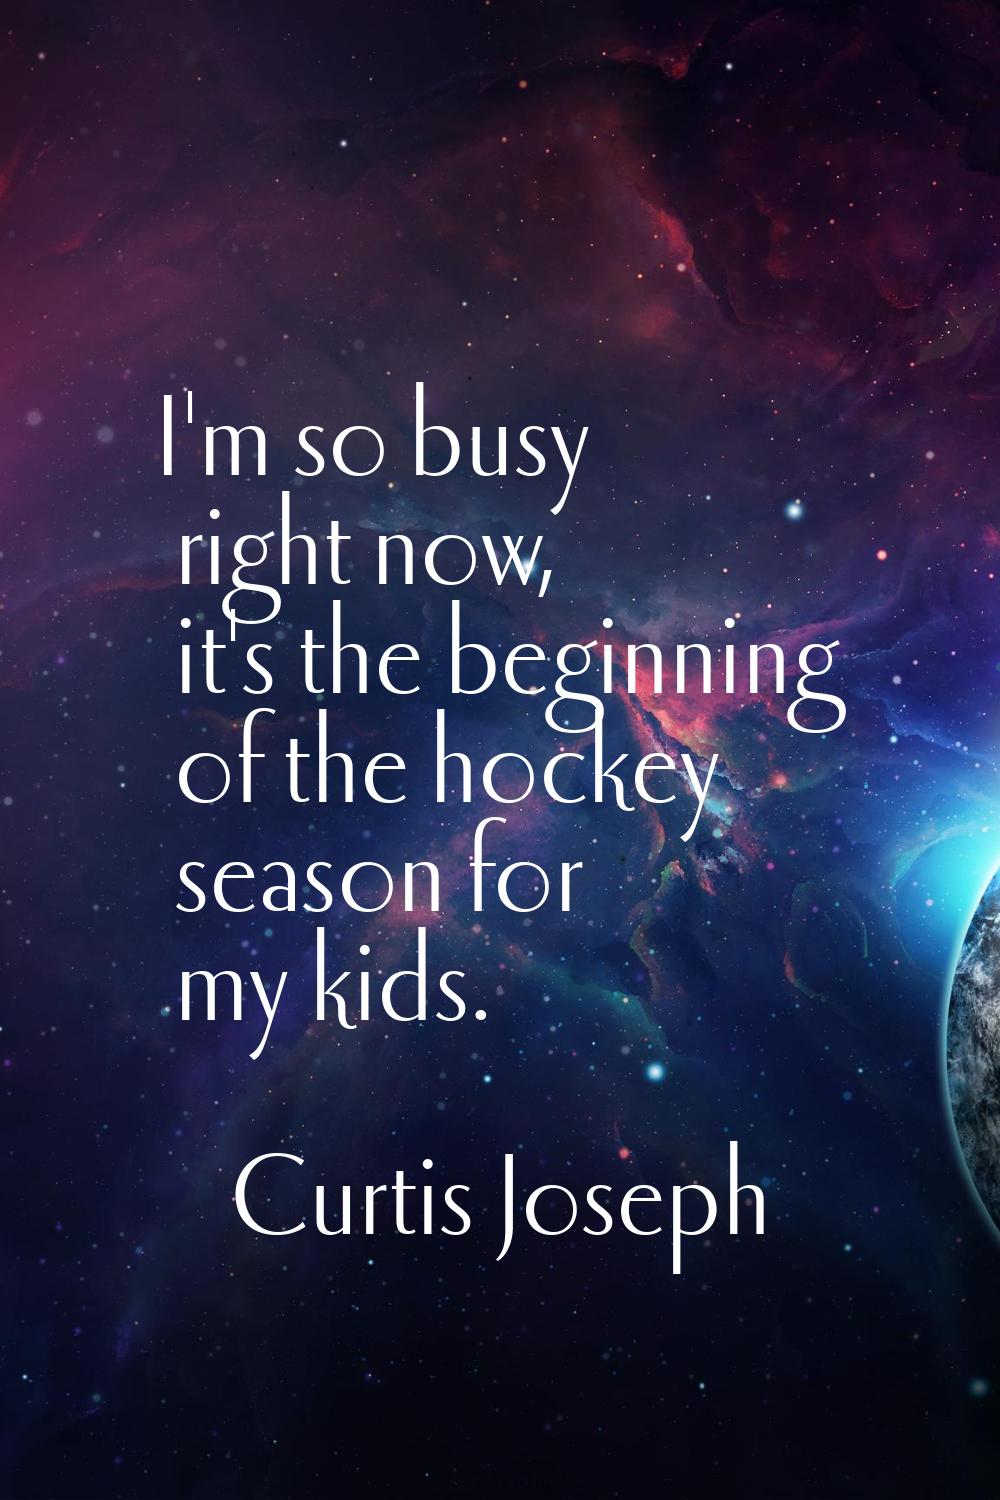 I'm so busy right now, it's the beginning of the hockey season for my kids.